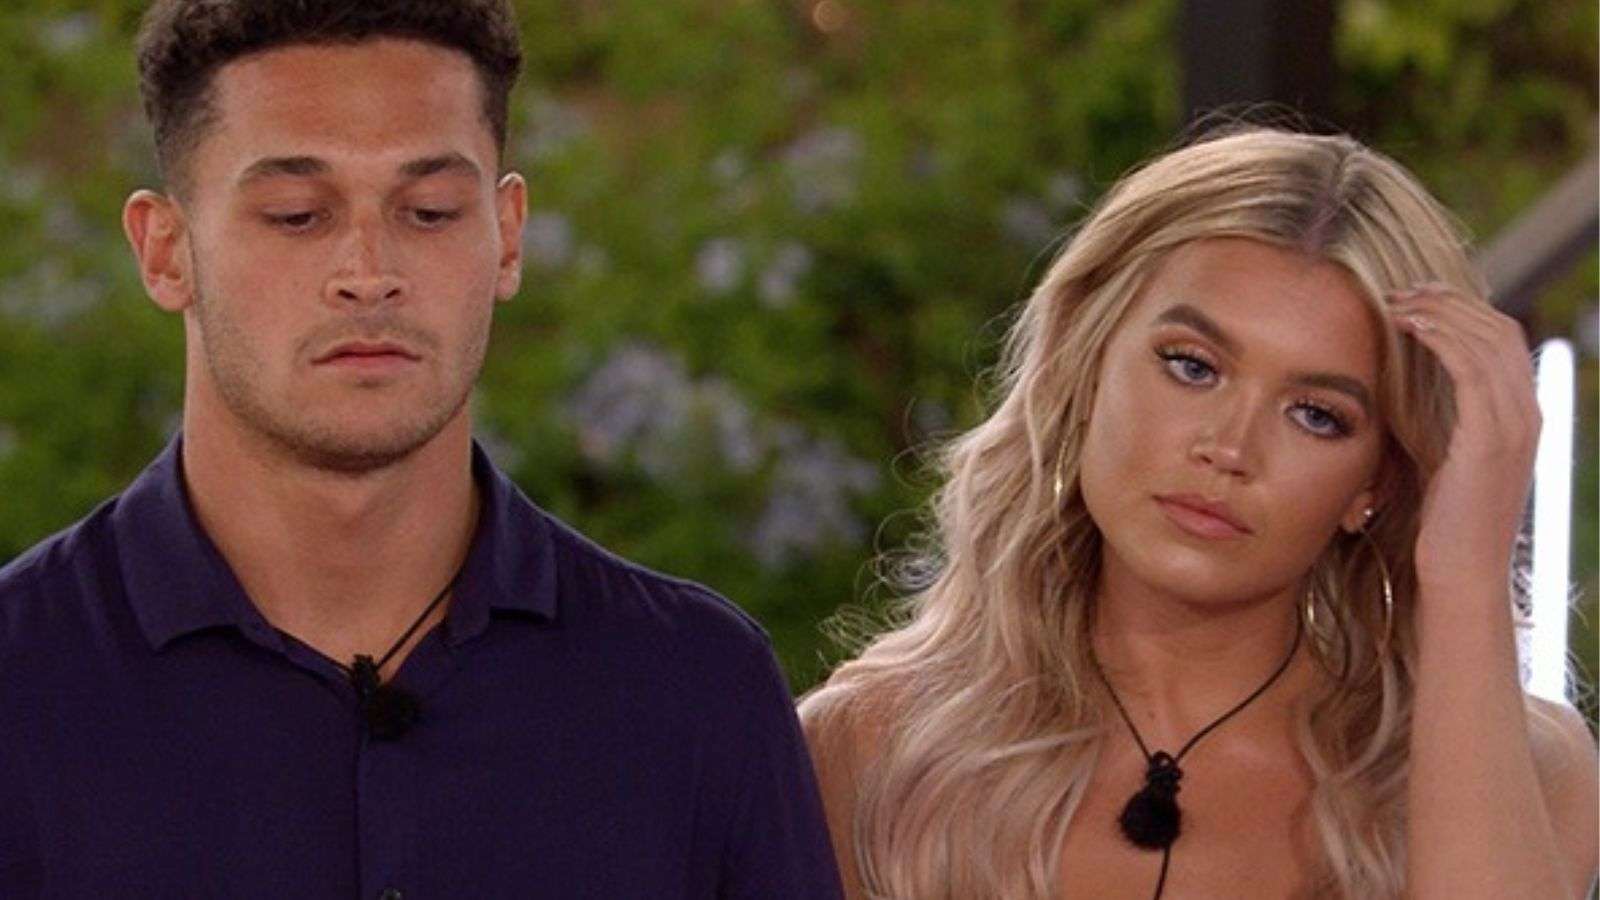 Molly and Callum from Love Island